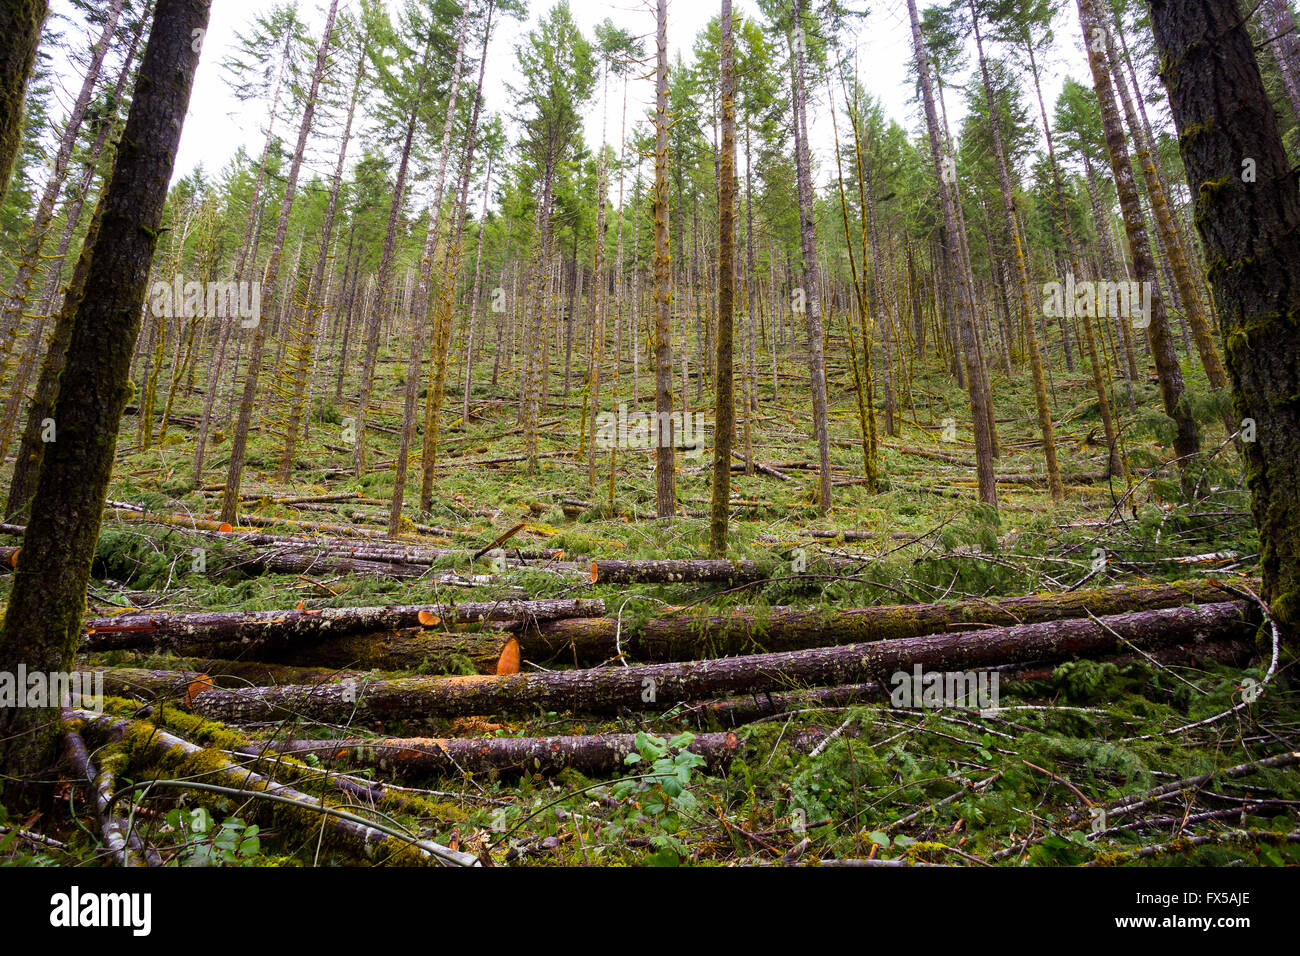 Tree thinning in a national forest shows detail of the logging industry in Oregon. Stock Photo